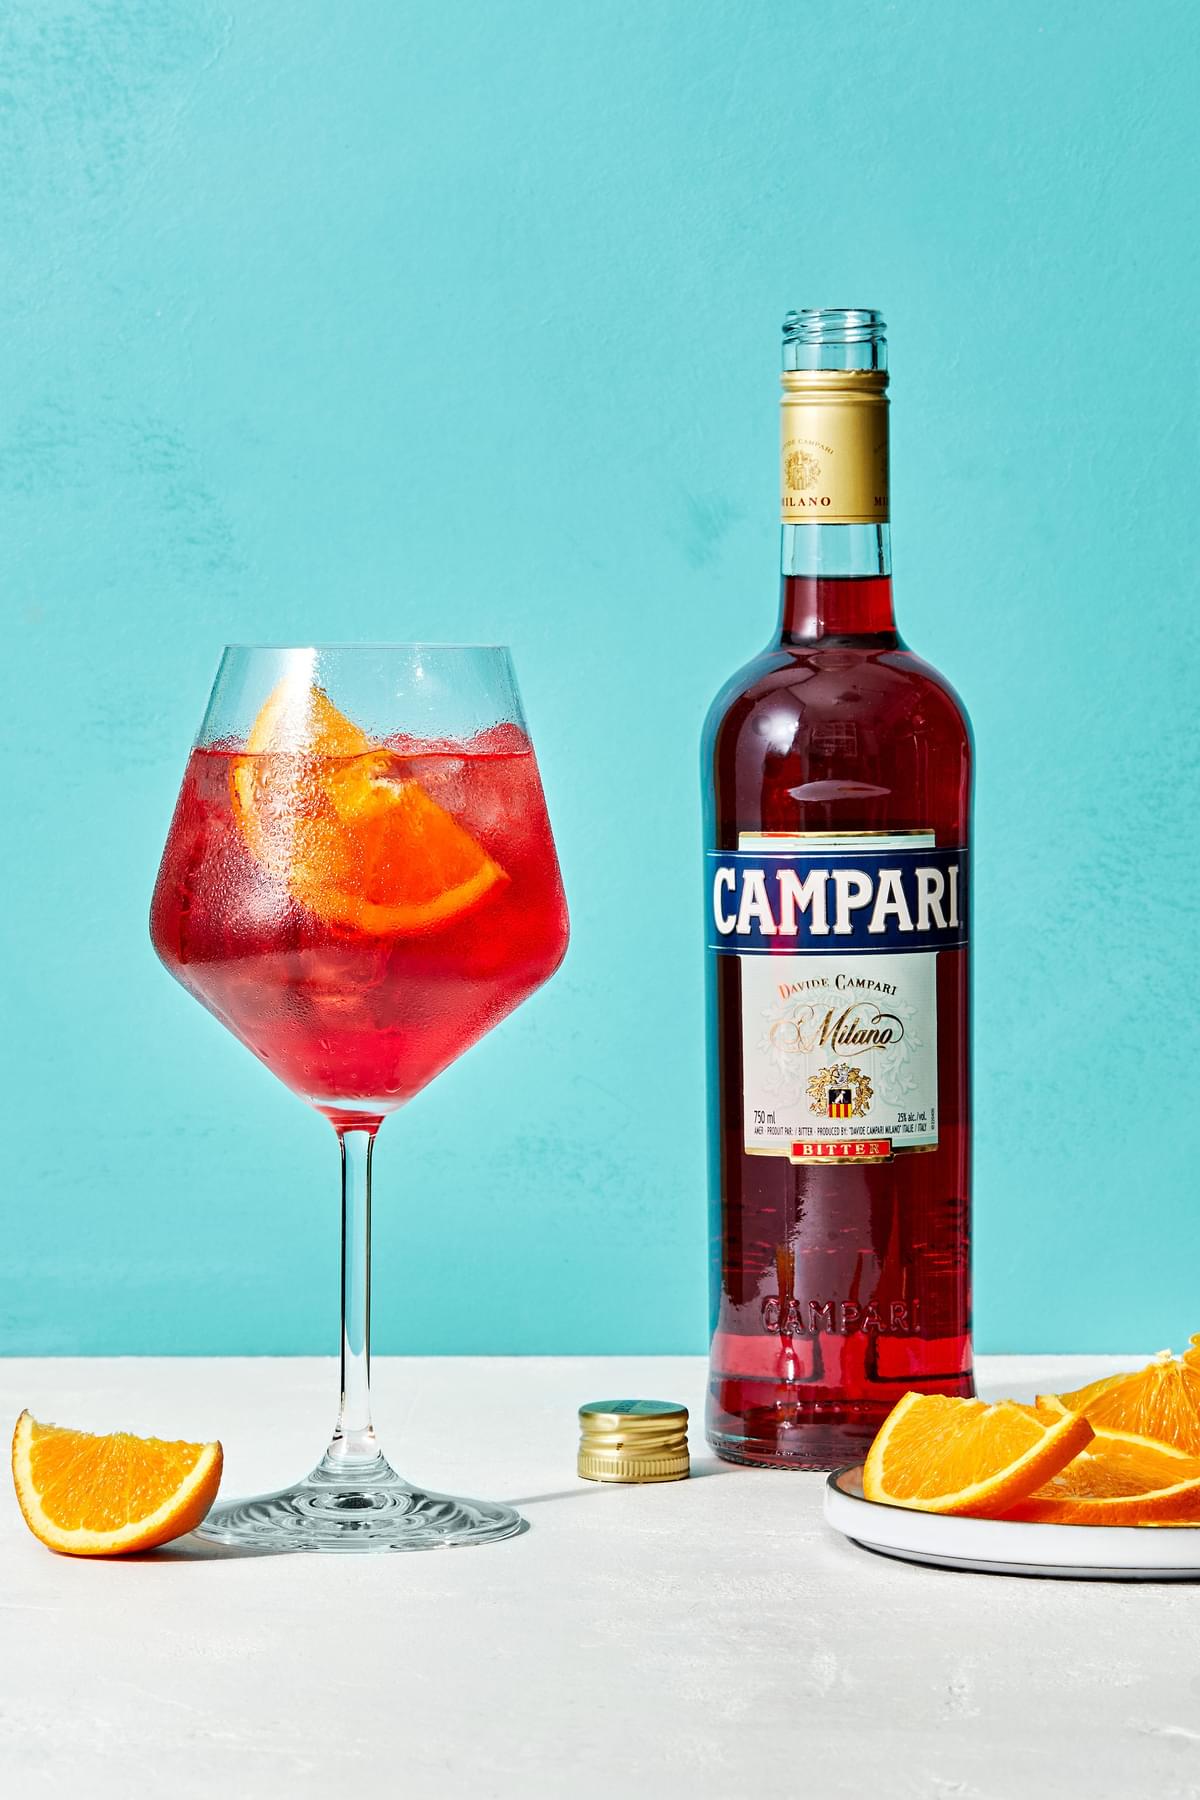 a campari spritz in a wine glass garnished with an orange wedge next to a bottle of campari and a plate of orange wedges